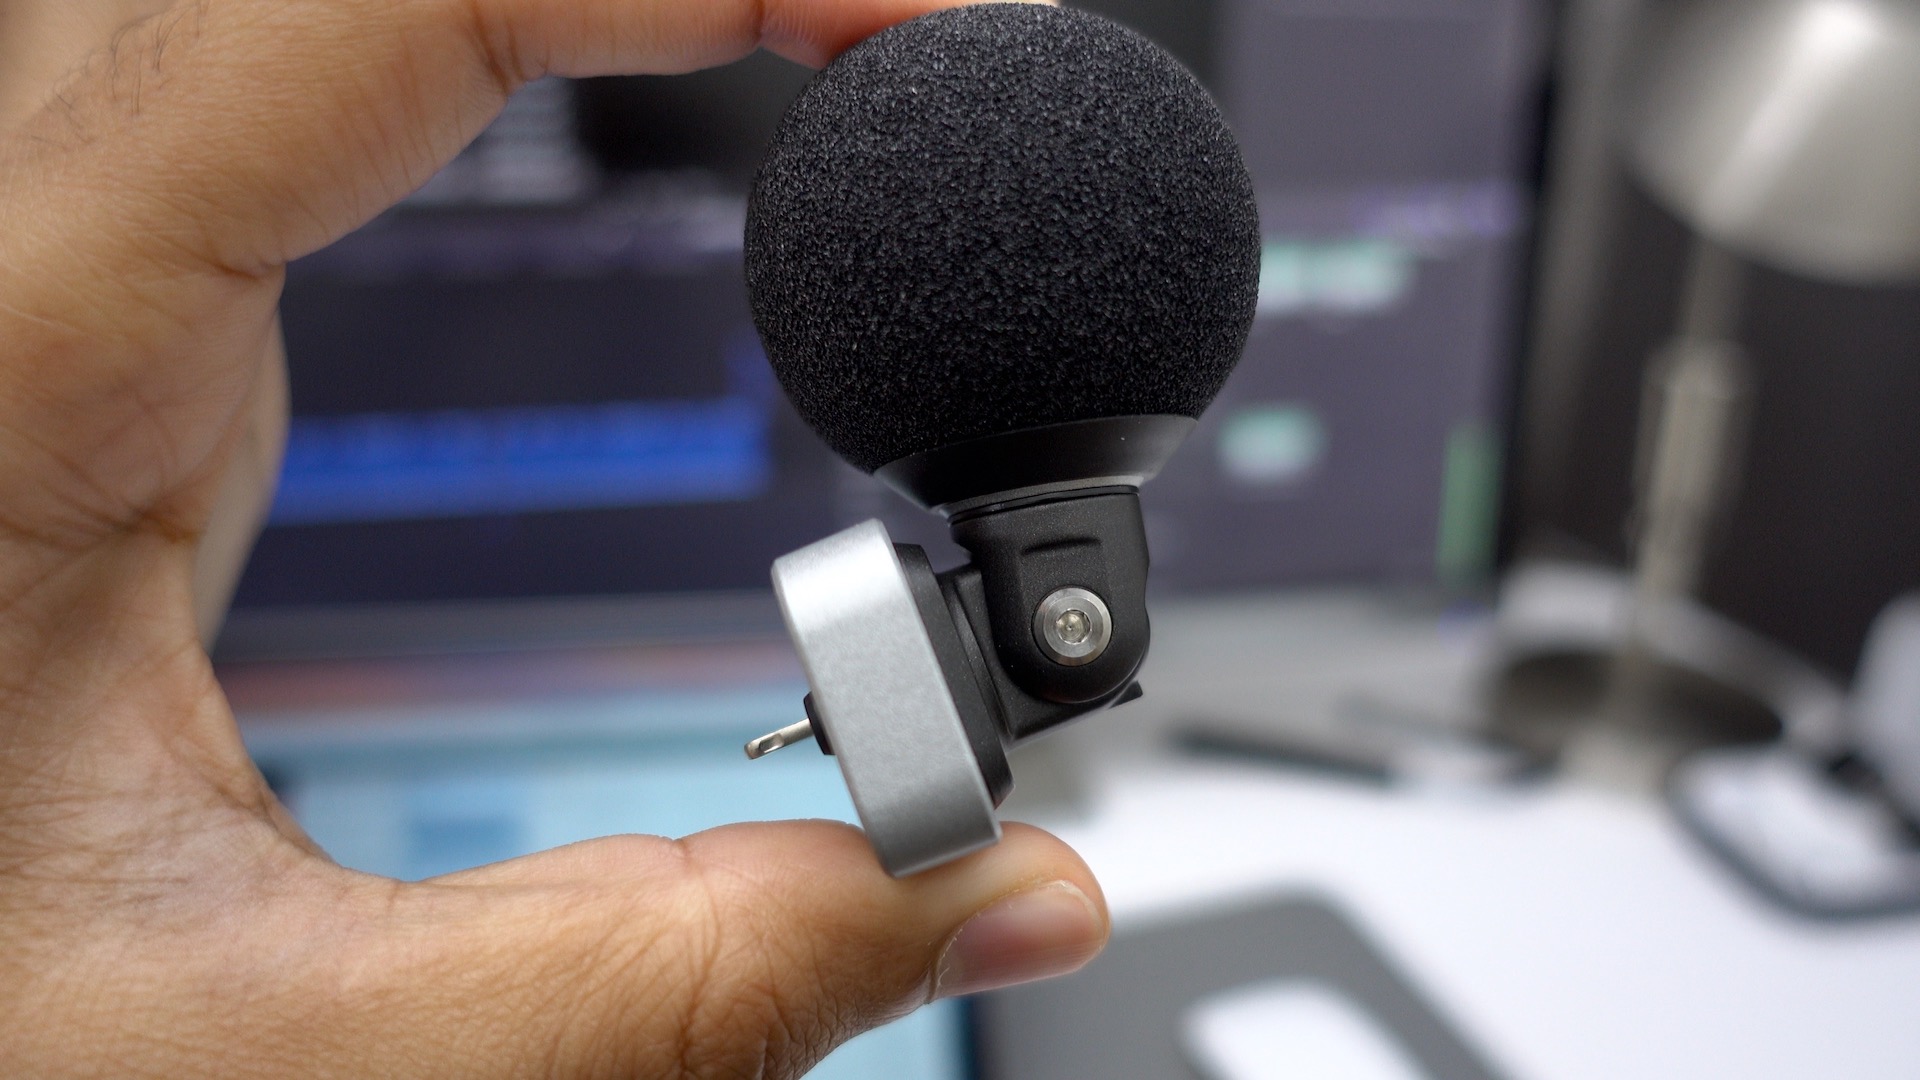 Shure MV88: a solid Lightning-enabled microphone for on-the-go